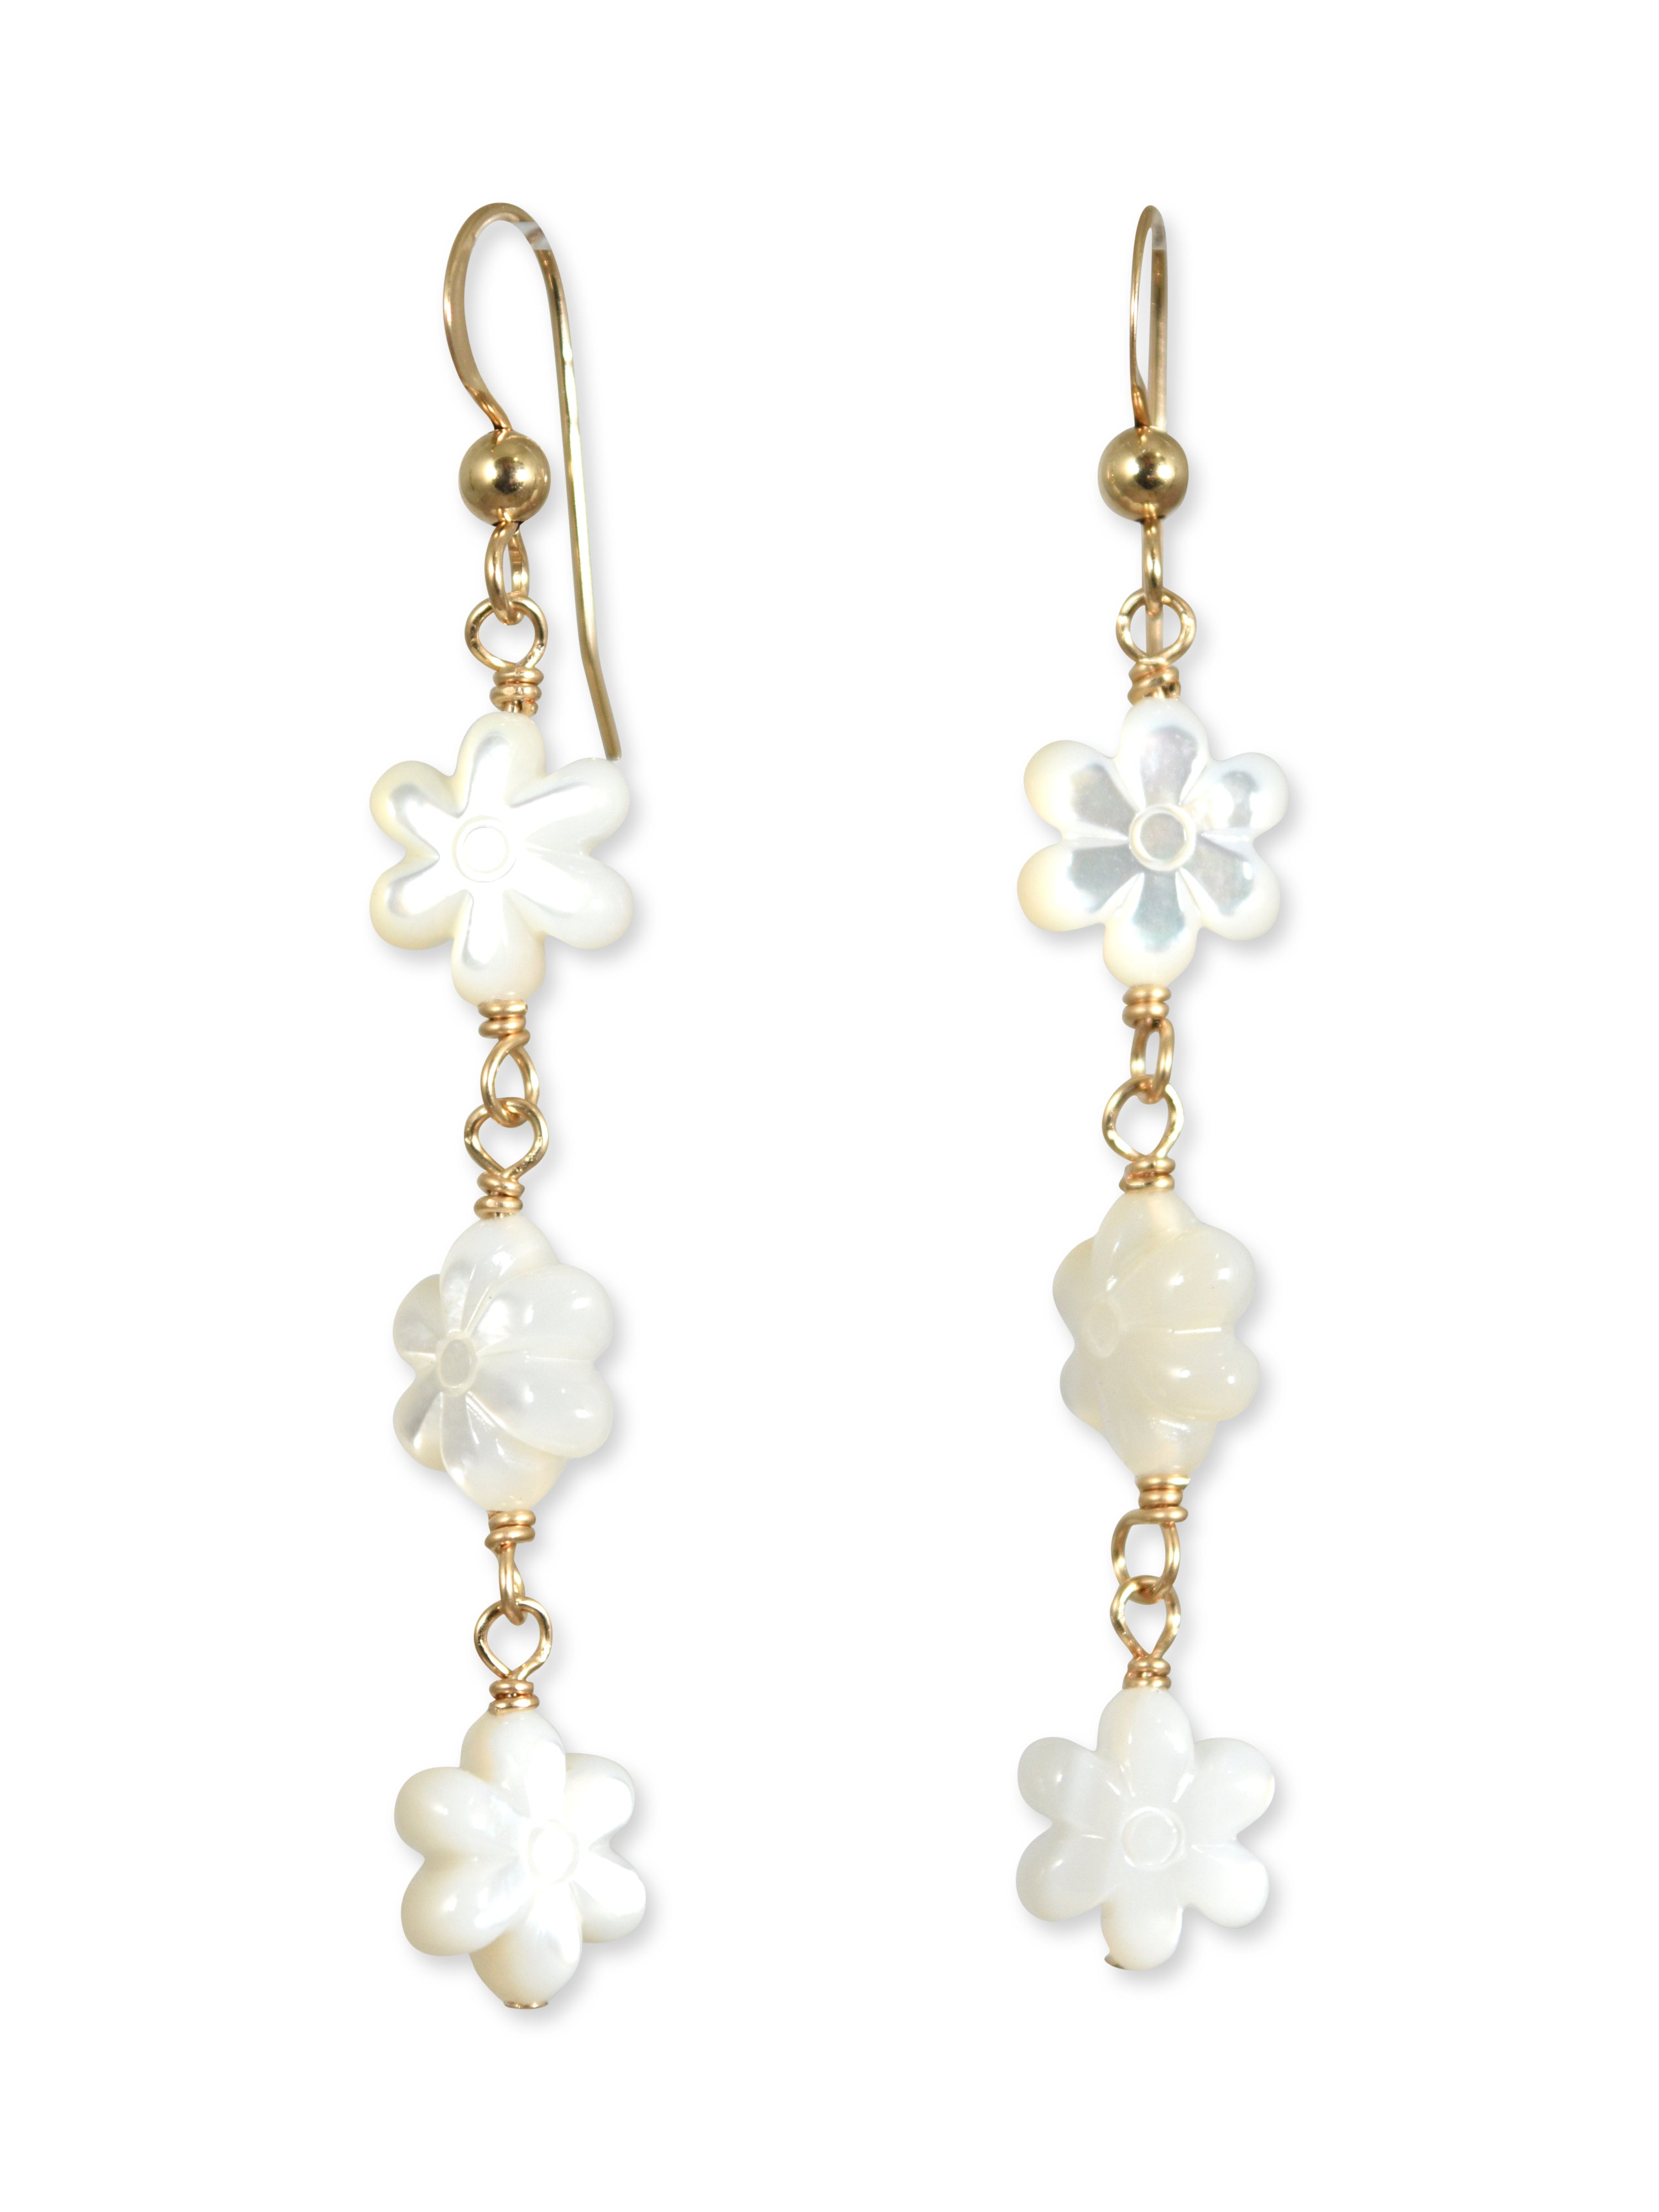 Aloha Earrings in White Mother of Pearl